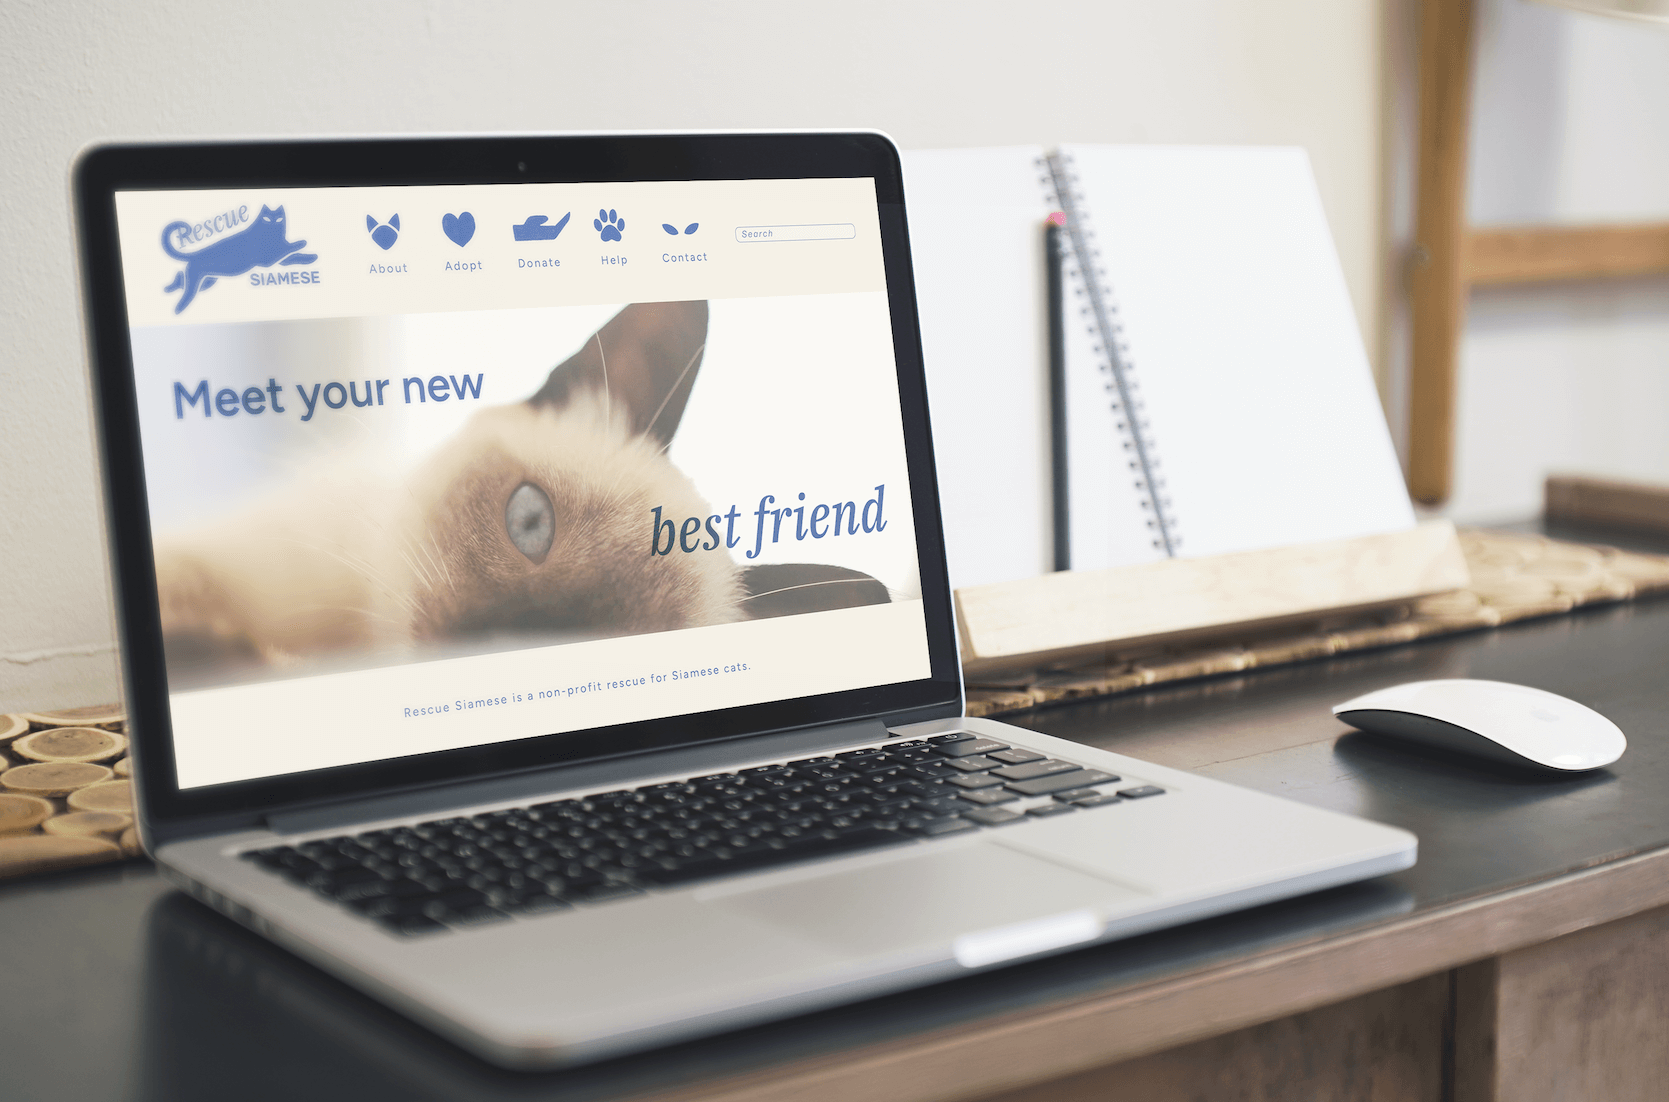 Image of Macbook featuring the Rescue Siamese landing page